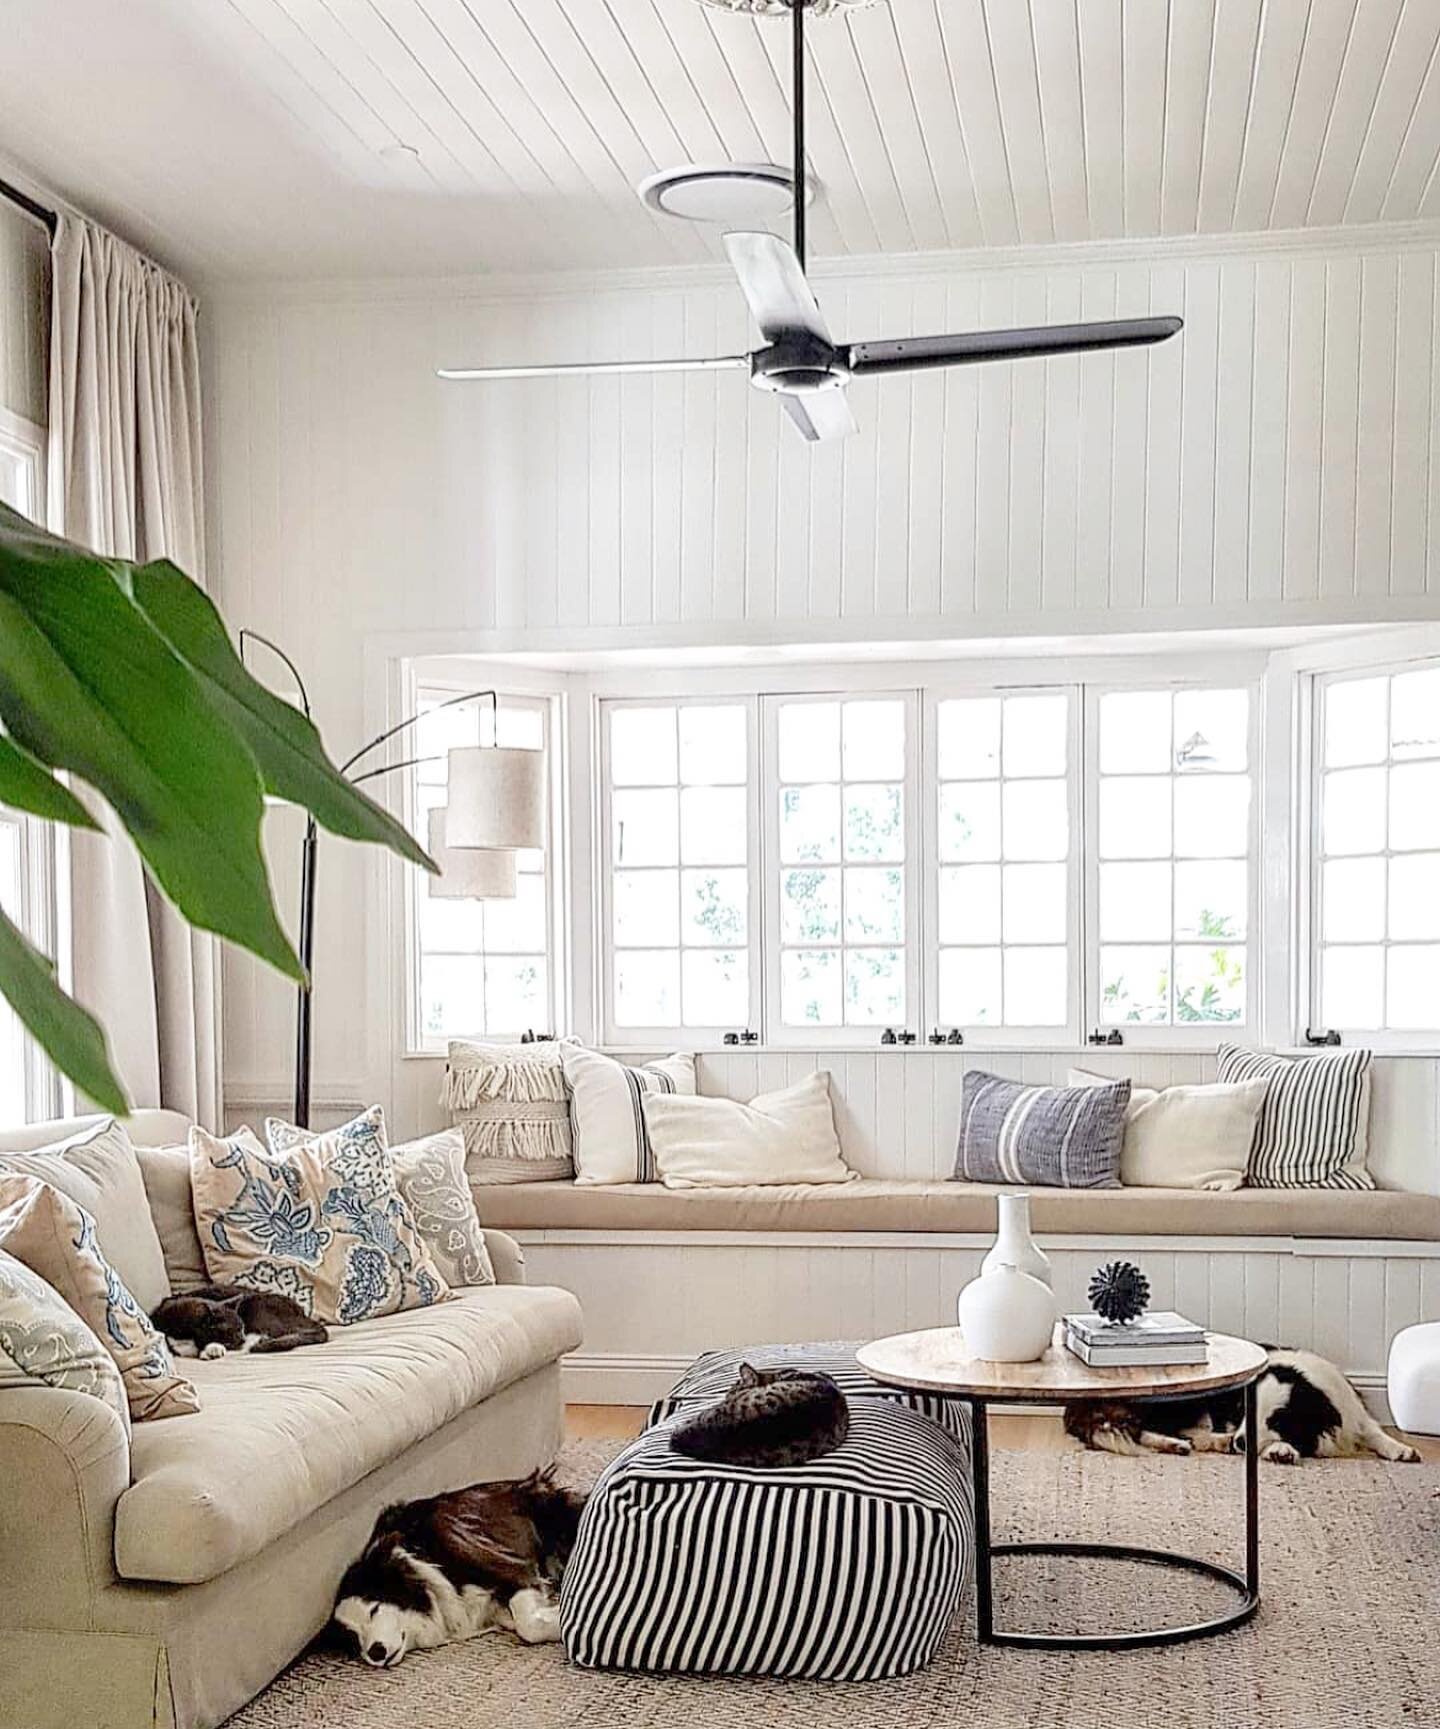 I&rsquo;ve been so amazed at the transformations of this gorgeous Queenslander home since I first found Catherine&rsquo;s @this_old_house52 account! Her whole home is stunning and her sweet fur babies are the cherry on top. 🤗 Go say hi! #FeatureFrid